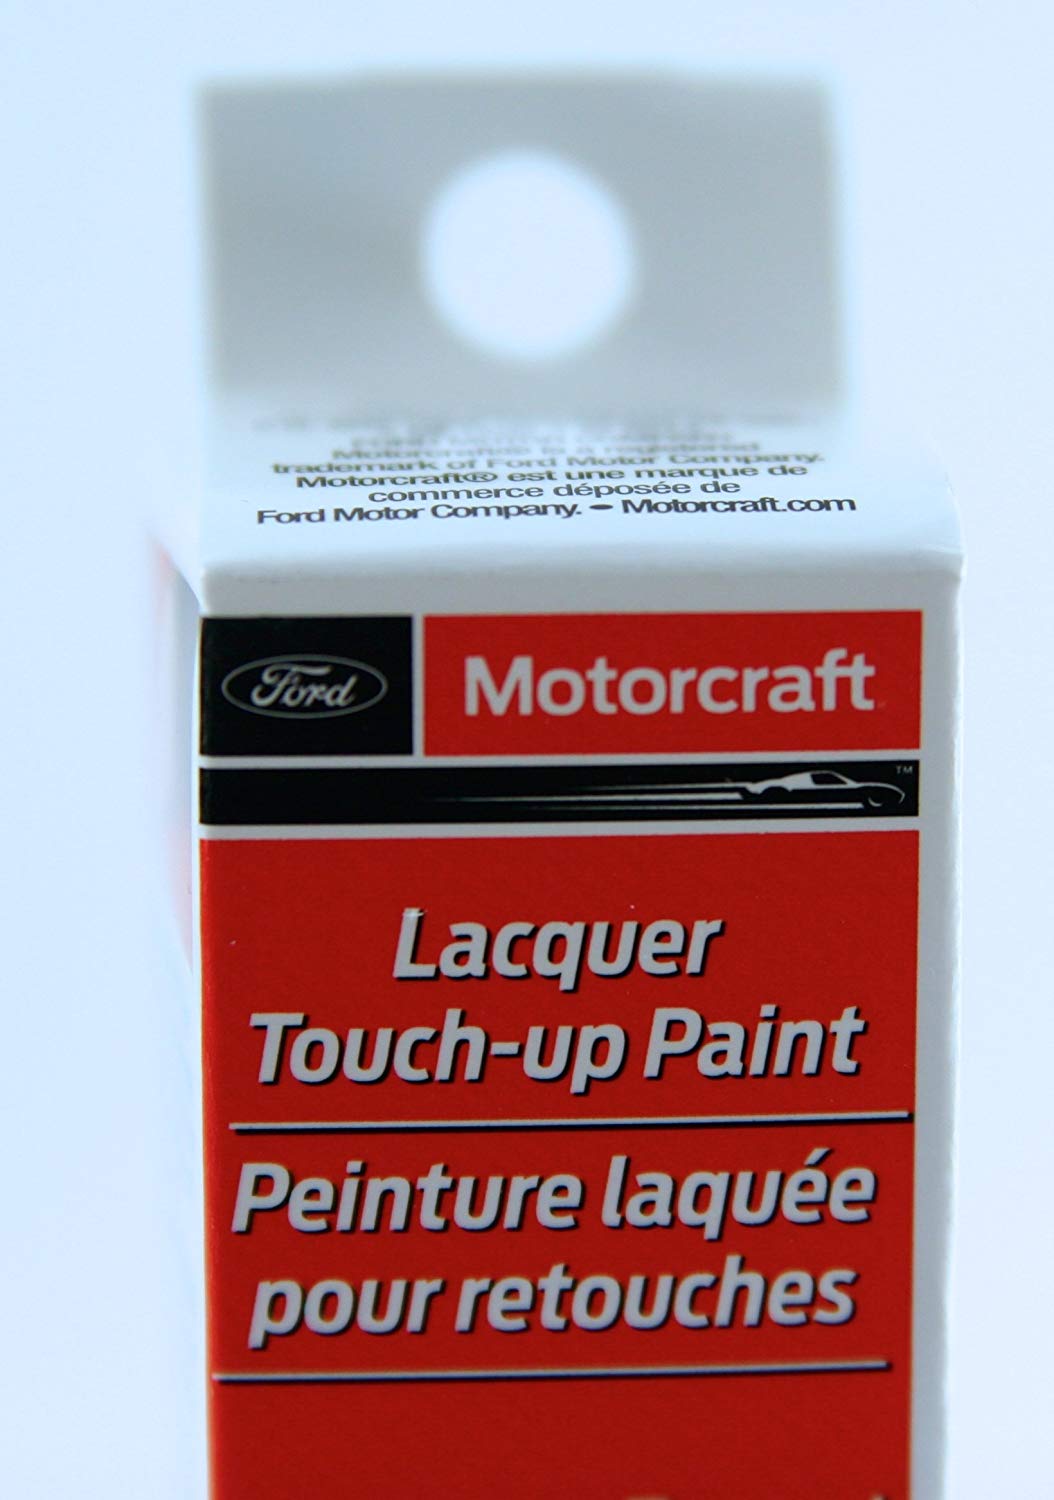 New Genuine Ford Motorcraft Touch Up Paint Bottle Earth H6 PMPC195007190A NIP - image 3